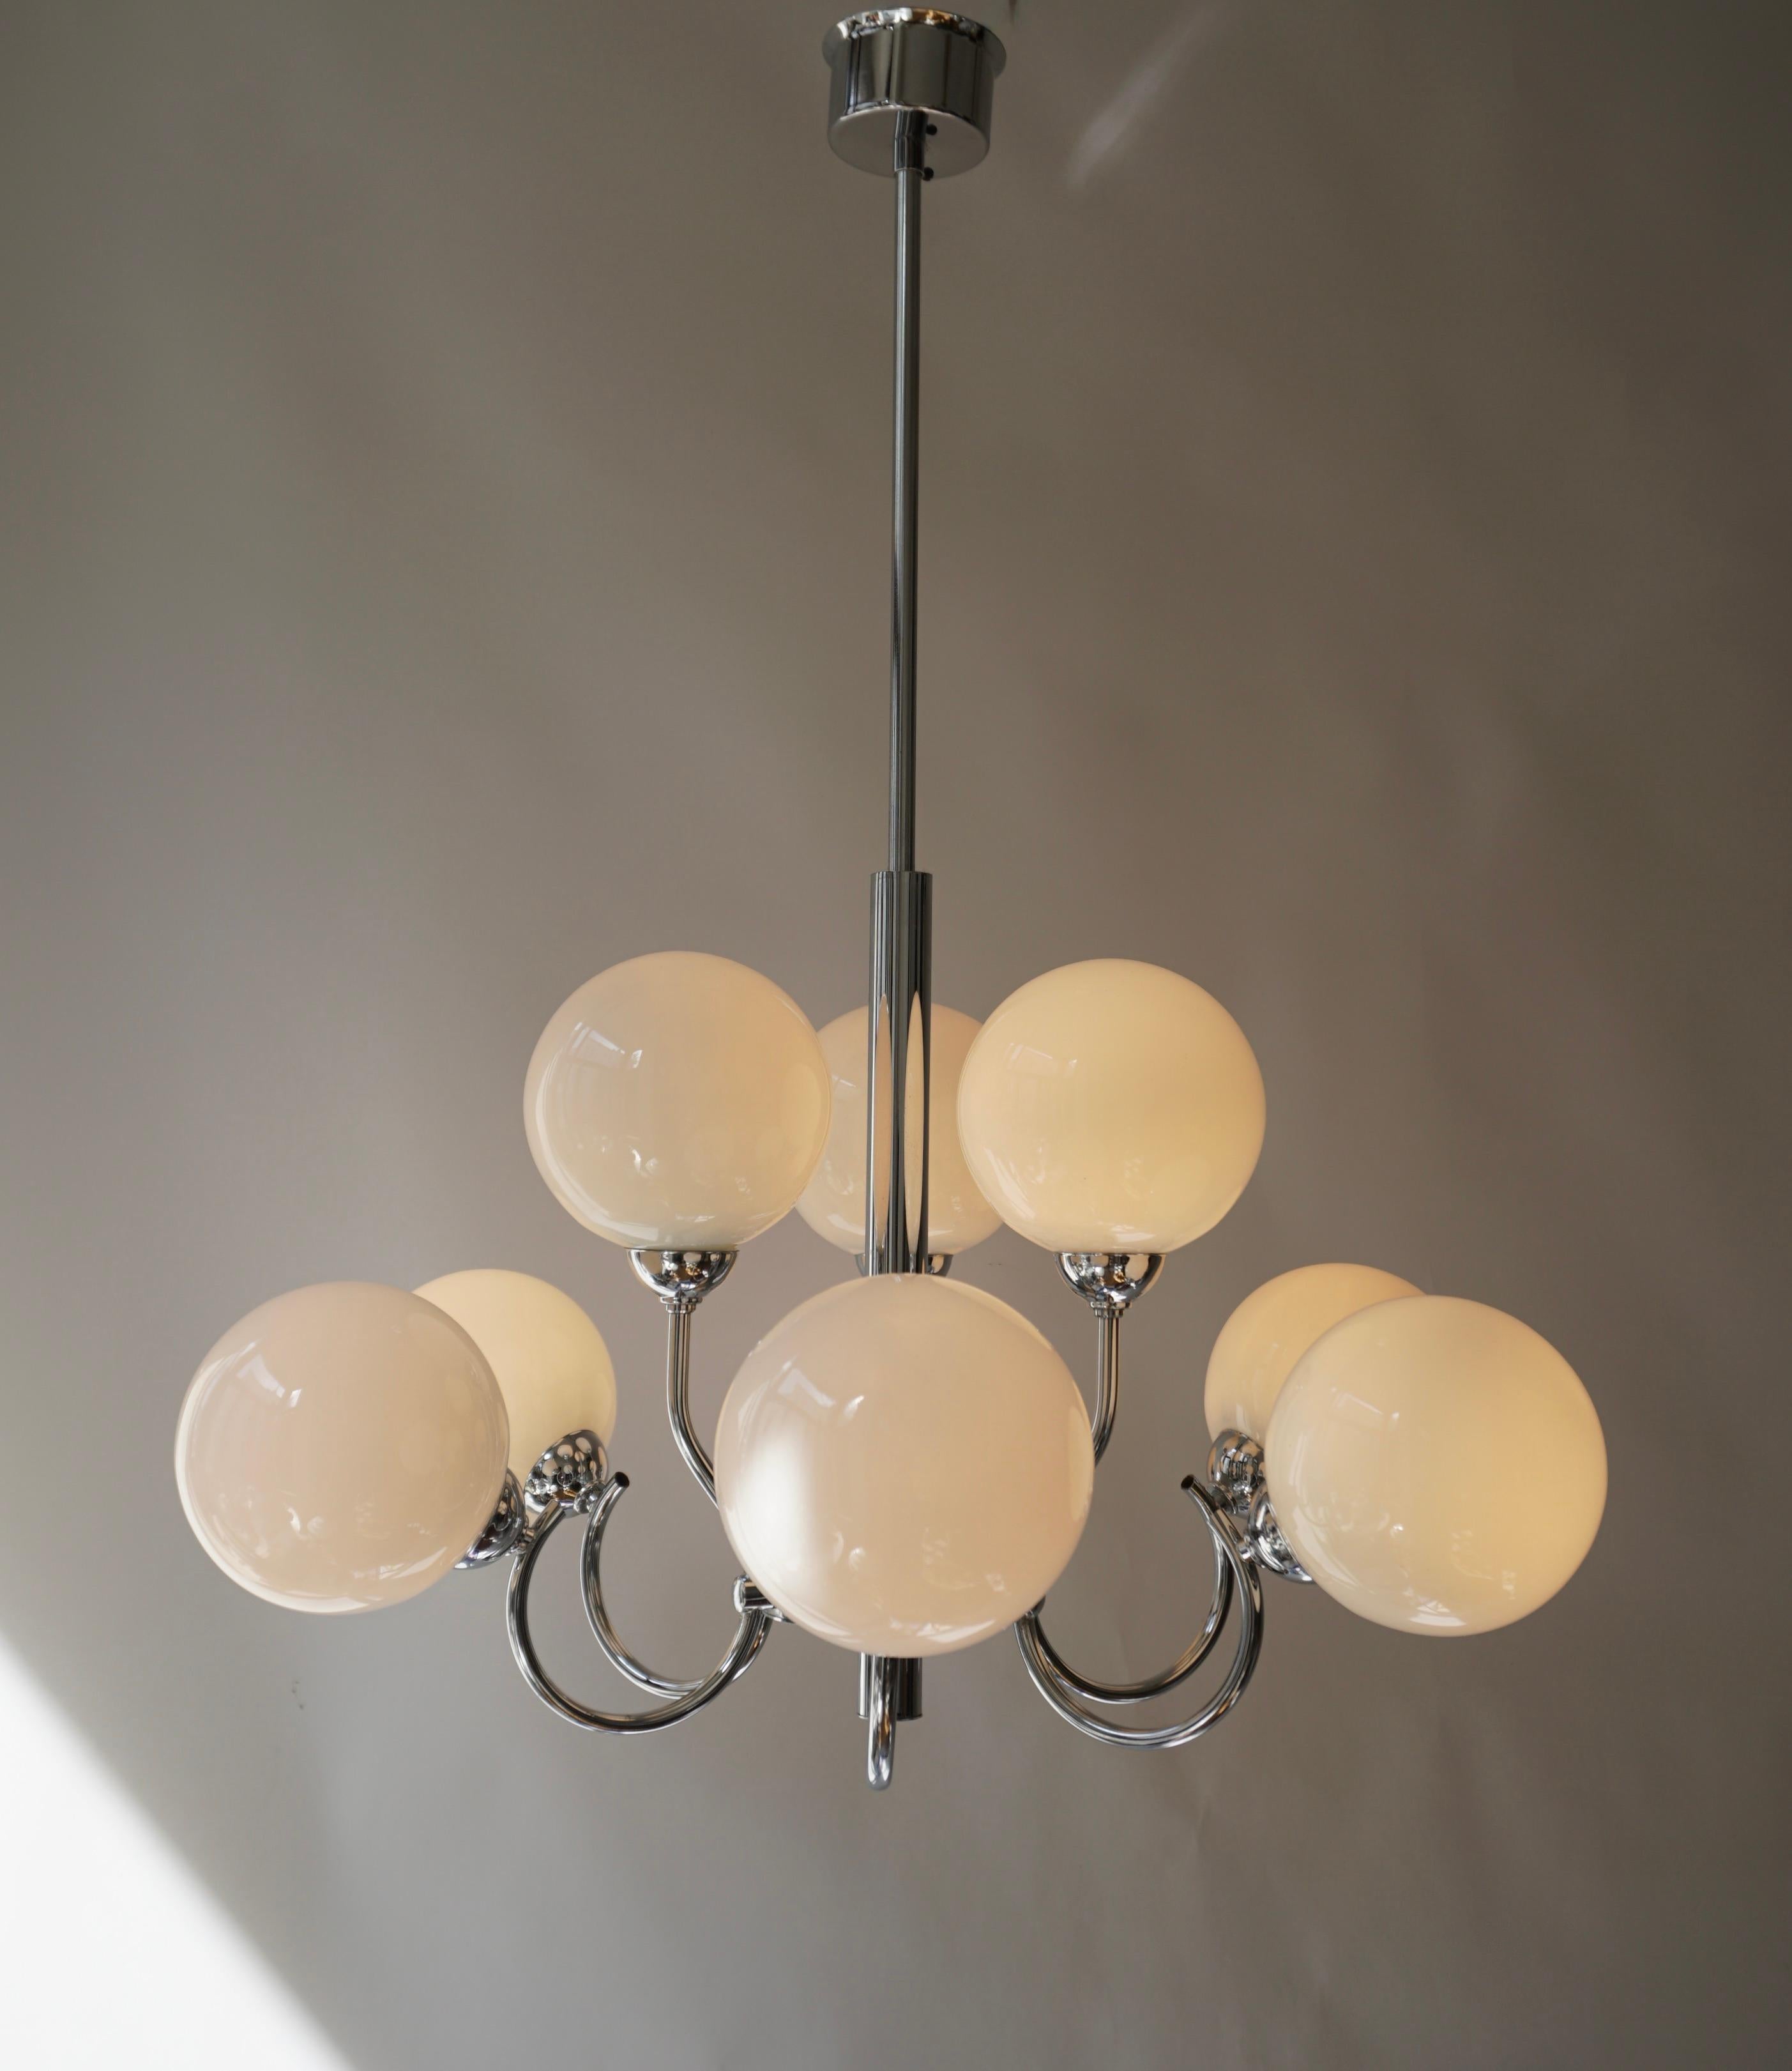 Chrome with opaline glass Ceiling light. 

This vintage chandelier has a chrome frame with 9 opaline glass lampshades spread over 2 levels. Modern lighting from the 1960s – 1970s.

The light requires nine single E14 screw fit lightbulbs (40Watt